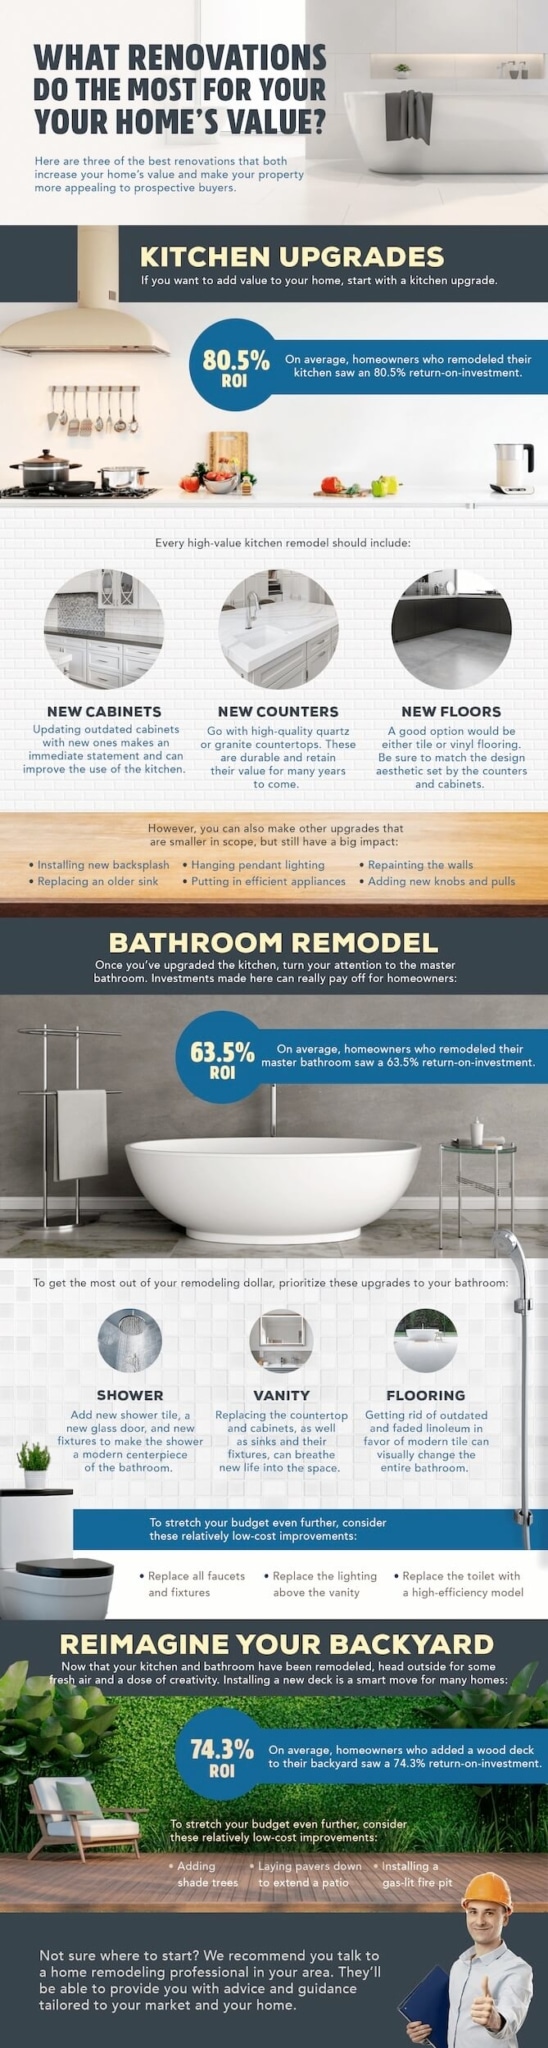 What Renovations Do The Most For Your Home's Value